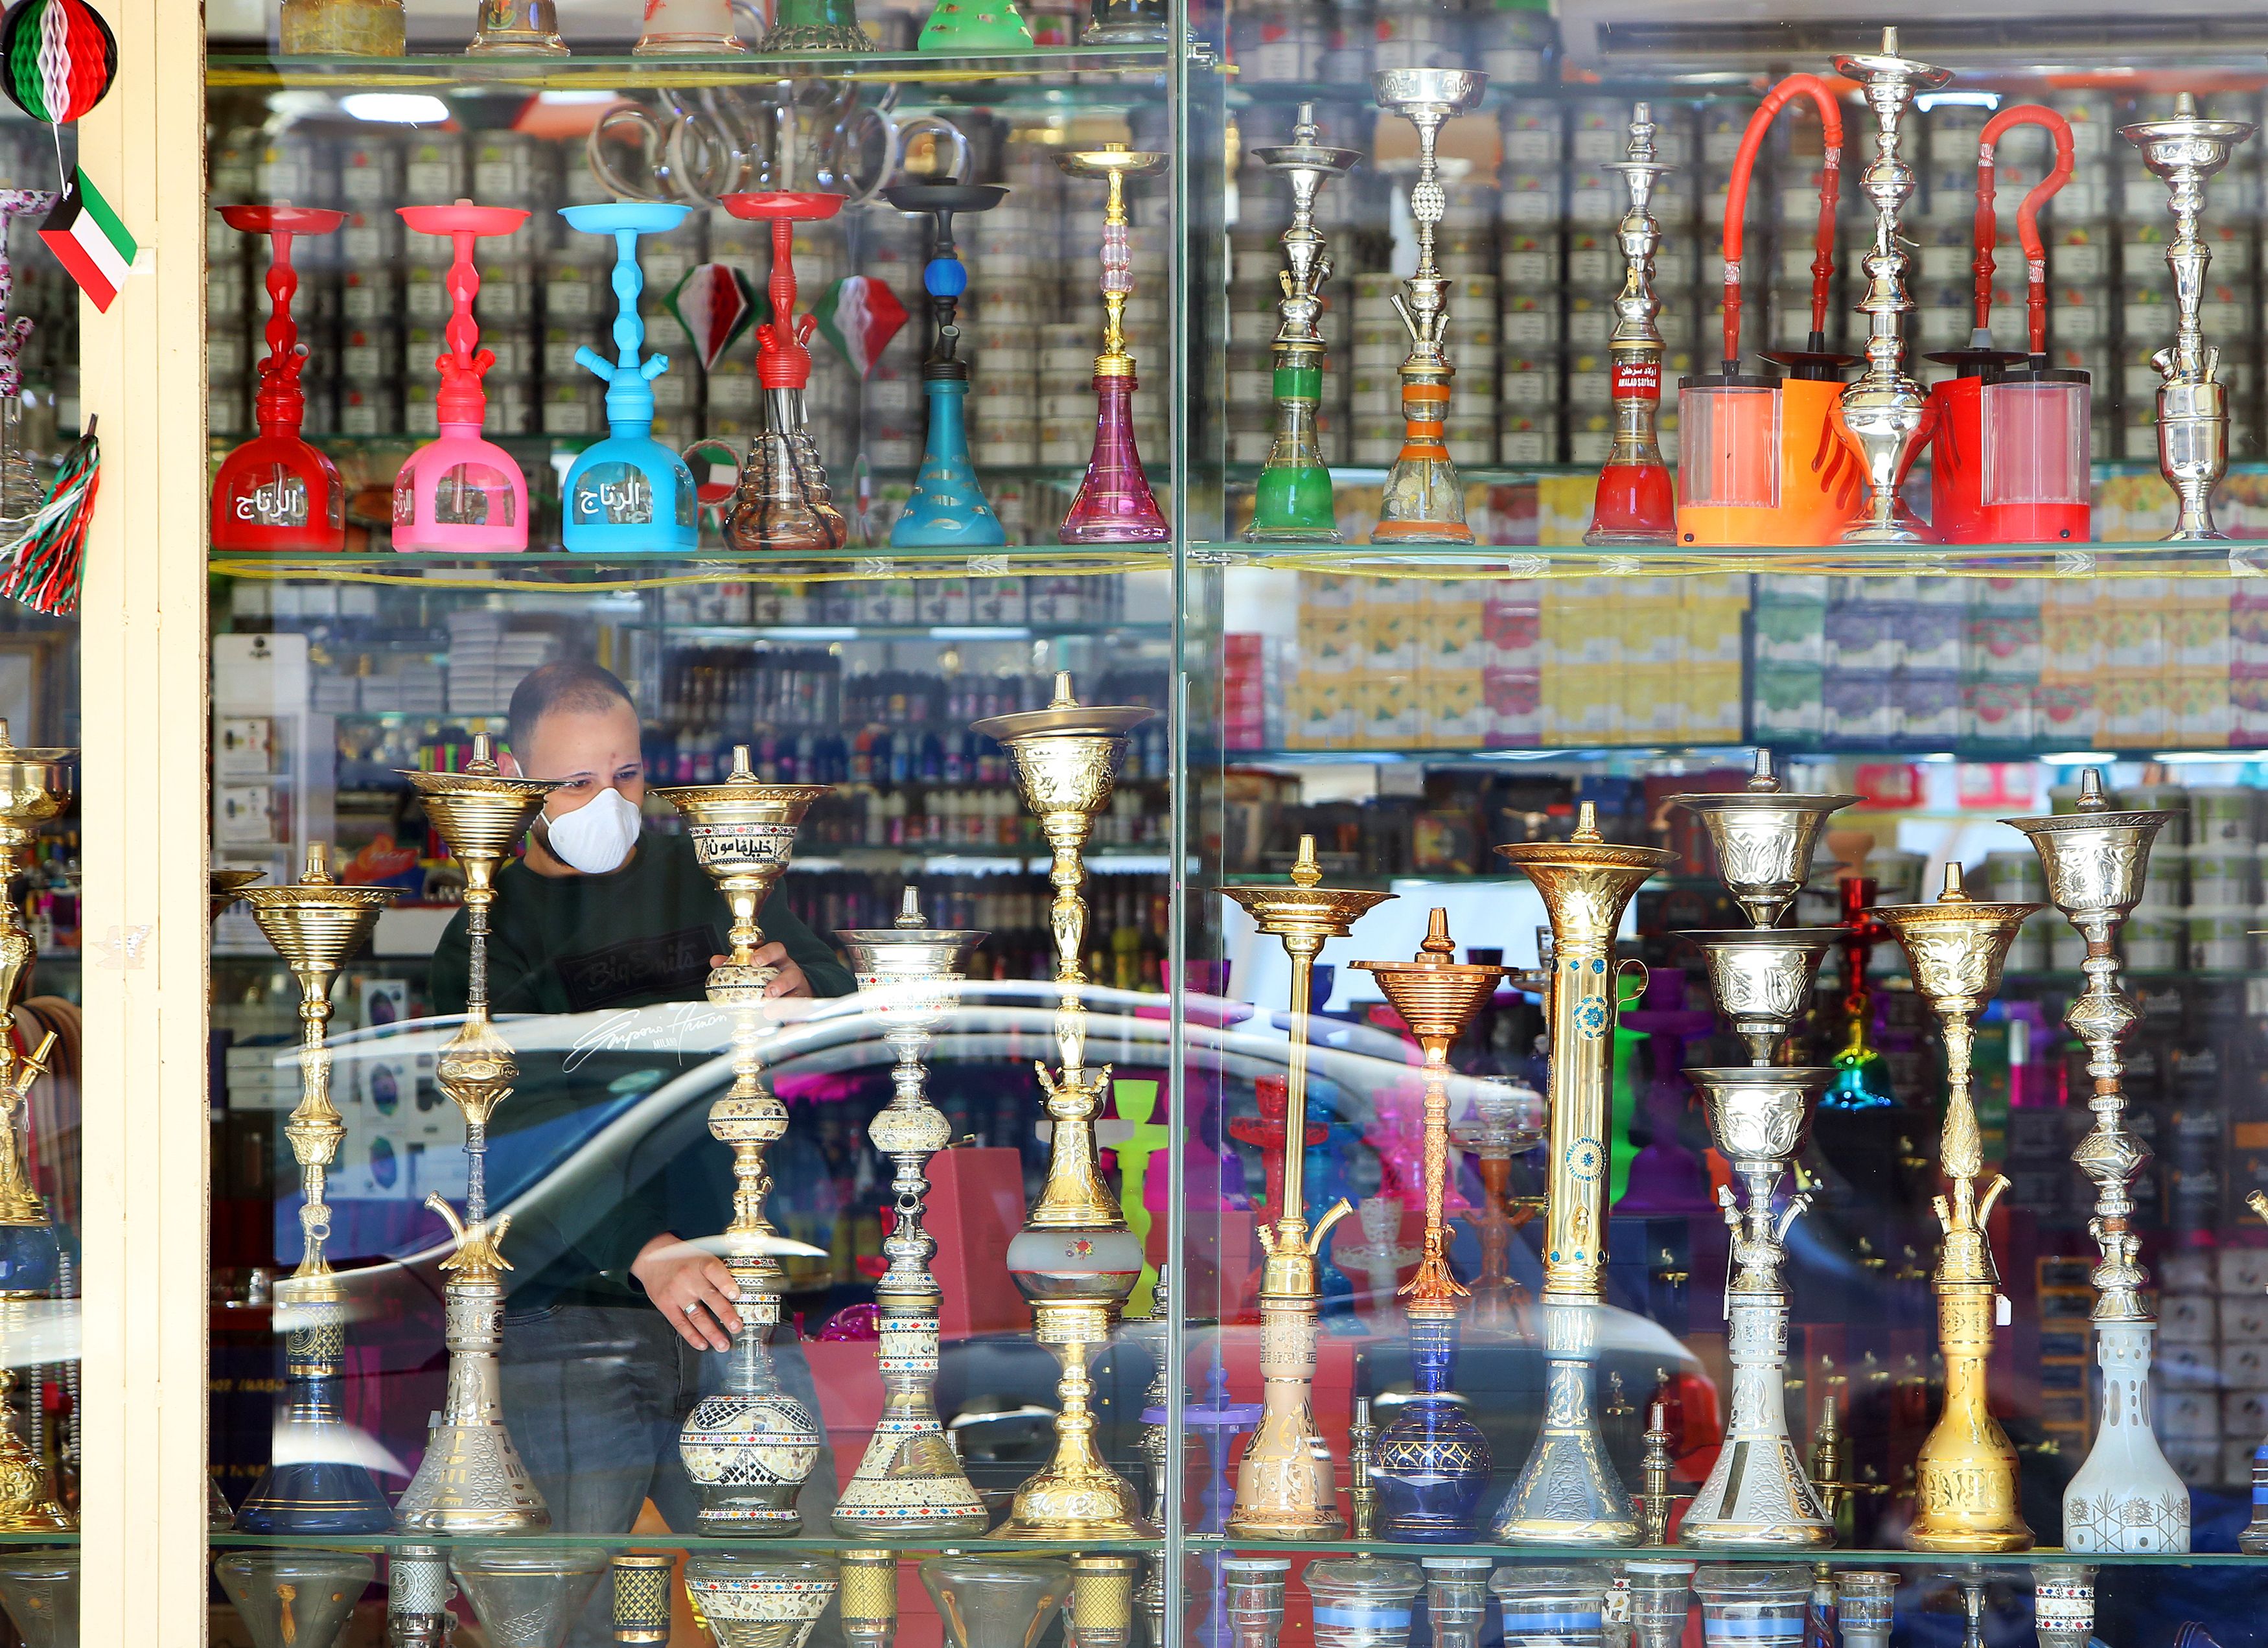 A cigarette and hookah seller wearing a protective mask looks through the front of his store in Kuwait City on March 5, 2020. The State of Kuwait issued a decision to ban hookah in public cafes until further notice in order to prevent the spread of the Corona virus.